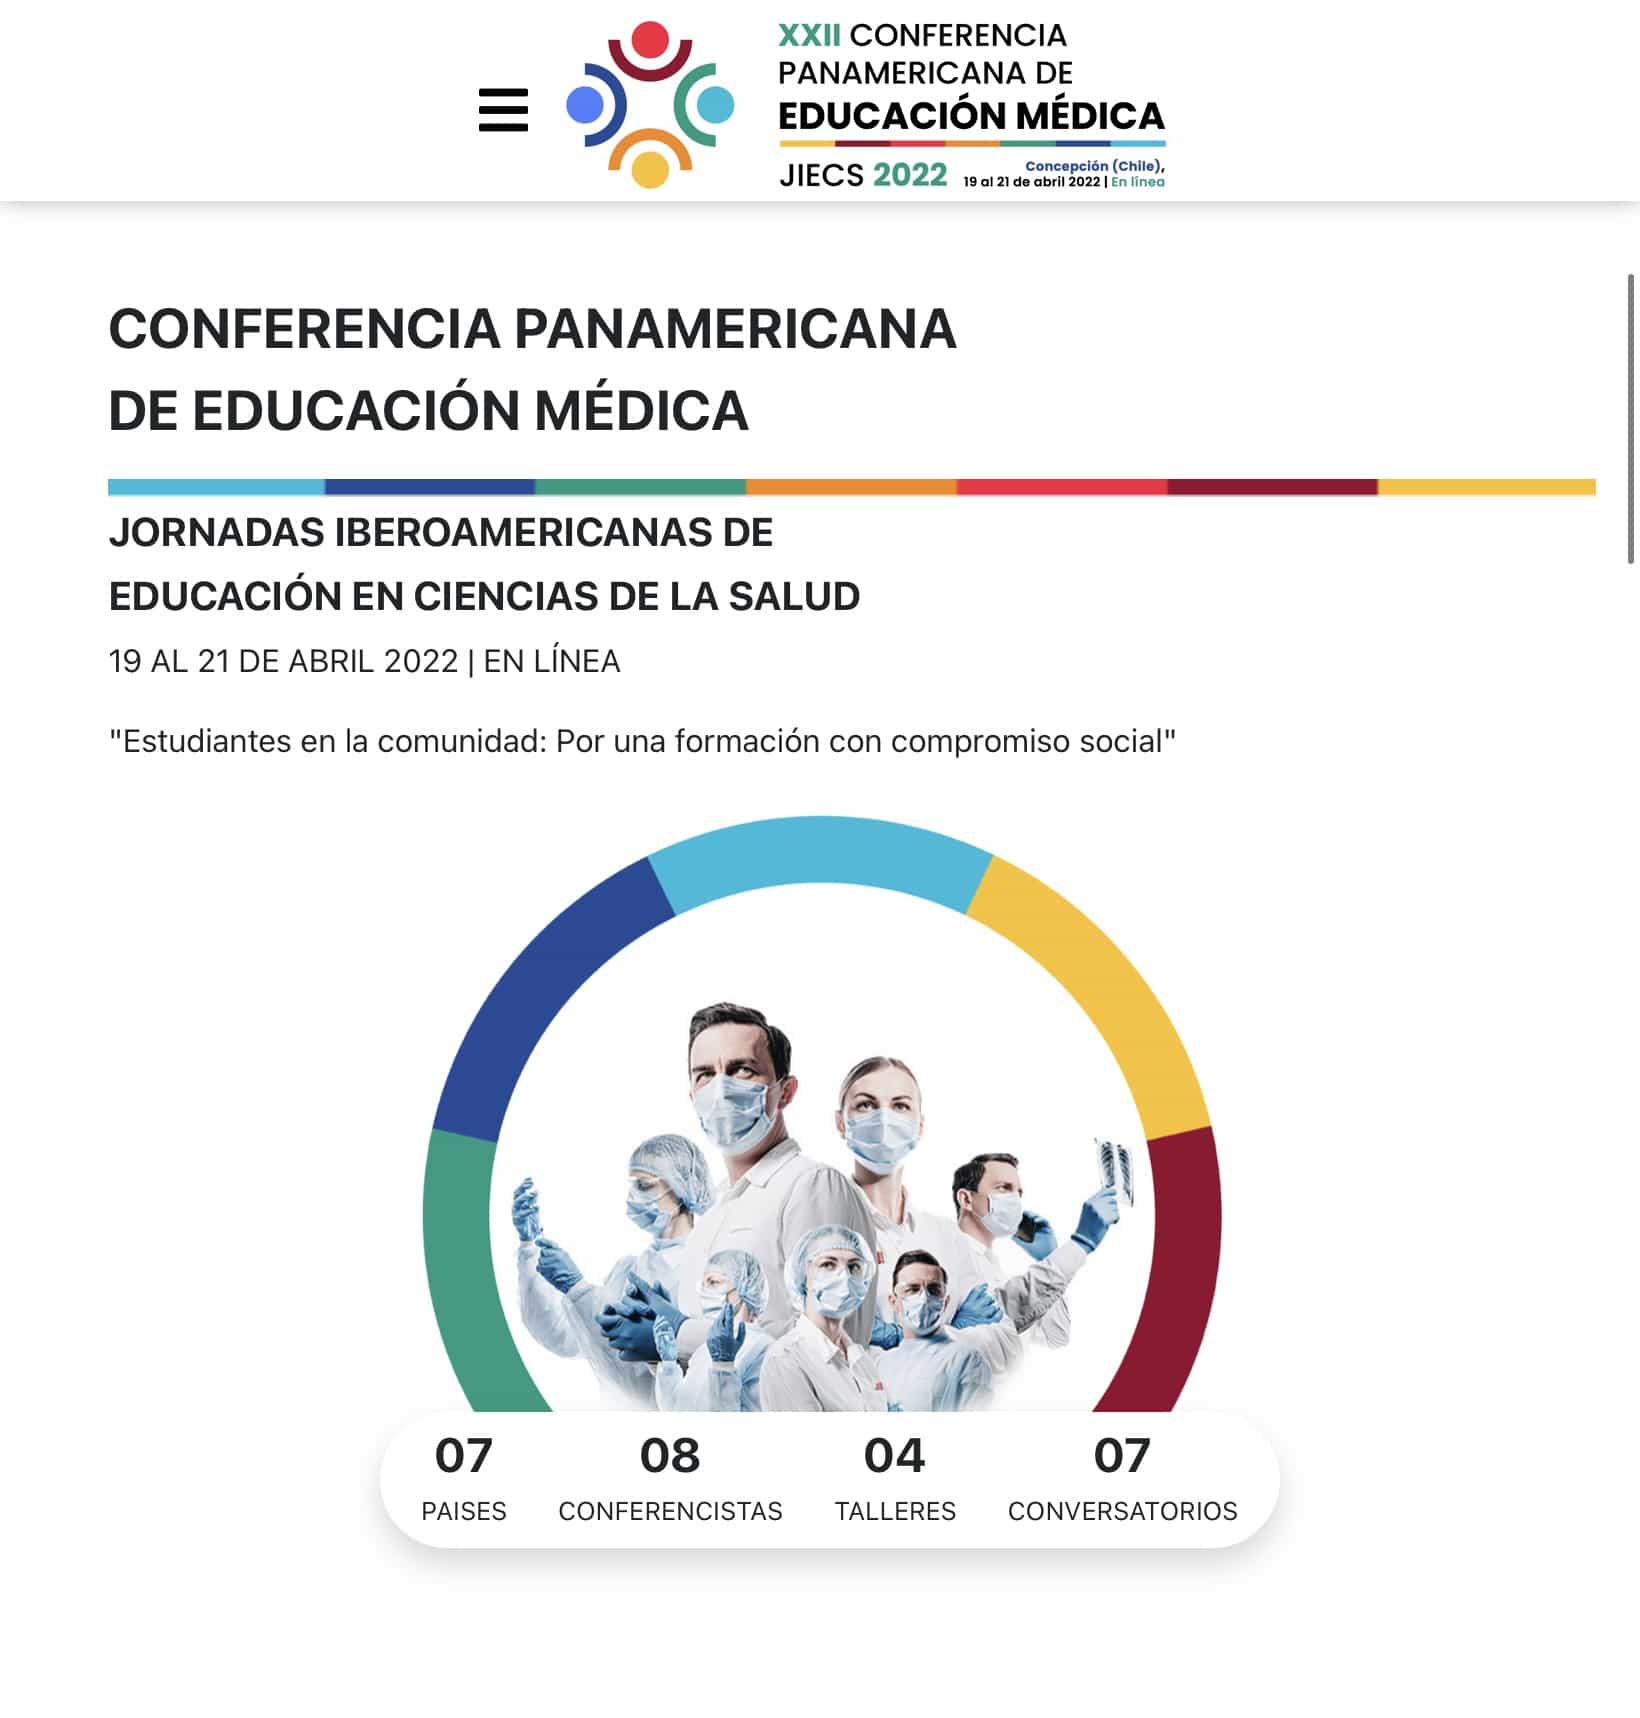 XXII Pan-American Conference on Medical Education